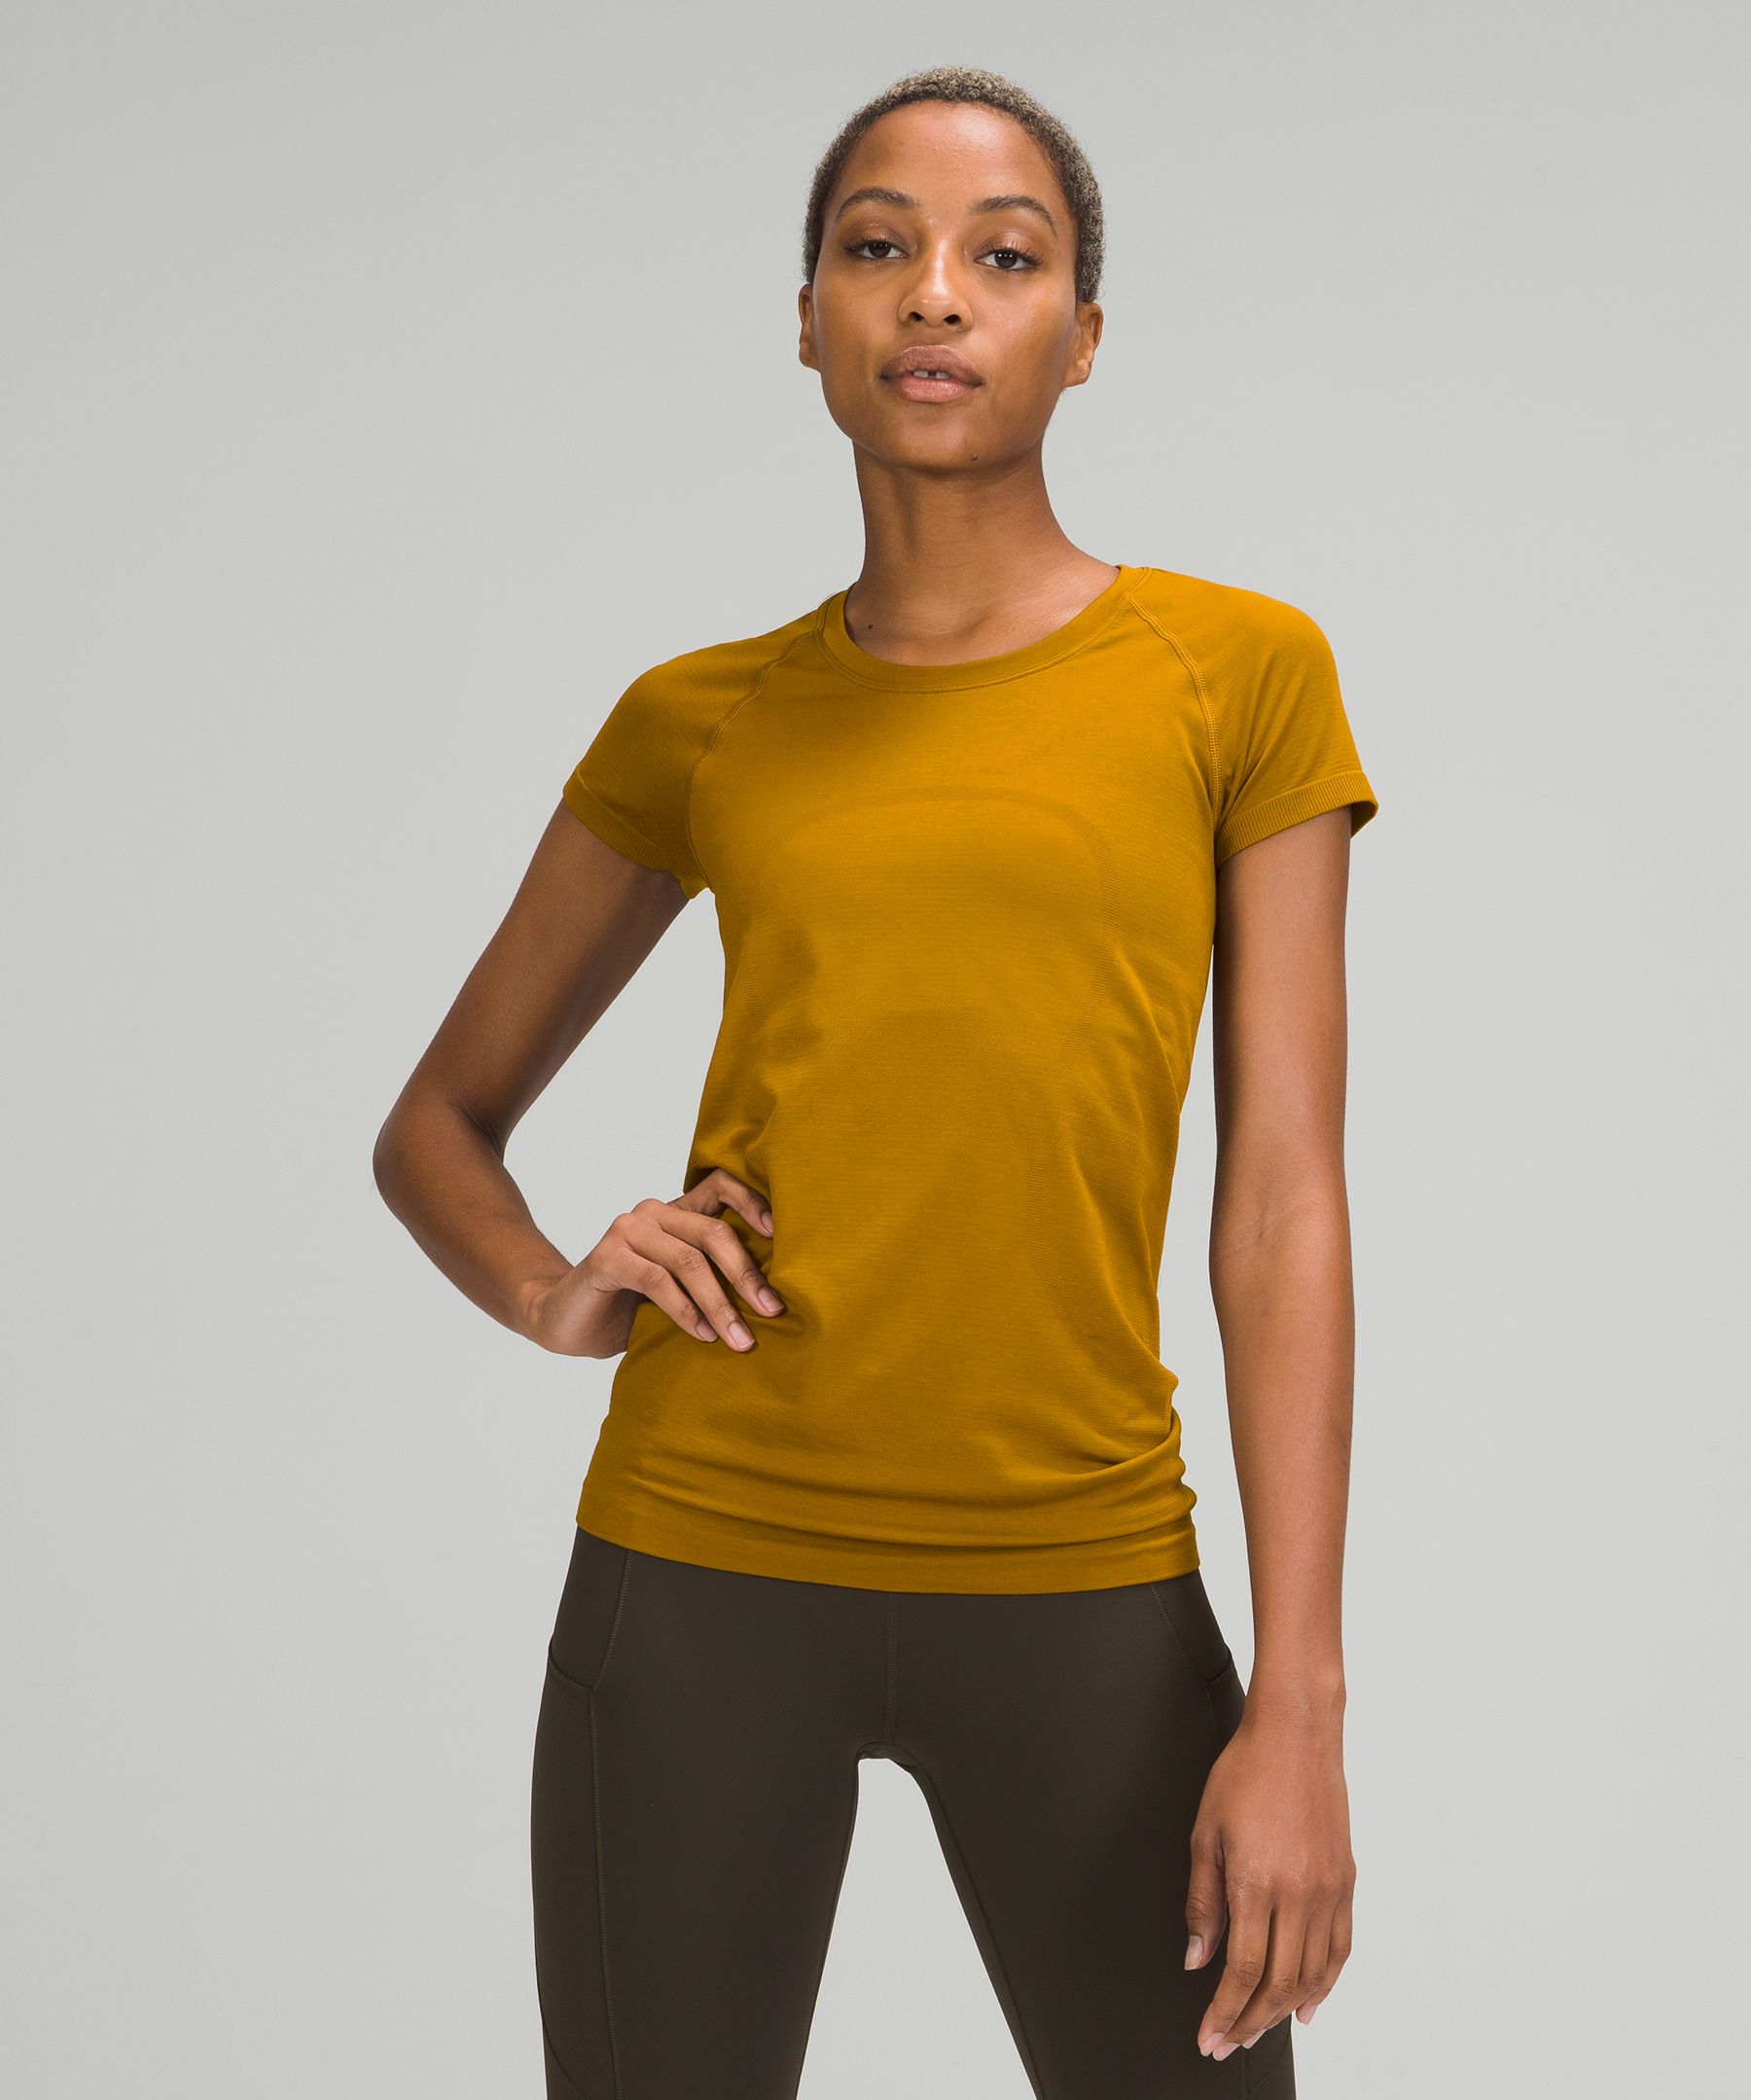 Lululemon Swiftly Tech Short Sleeve Shirt 2.0 In Gold Spice/gold Spice